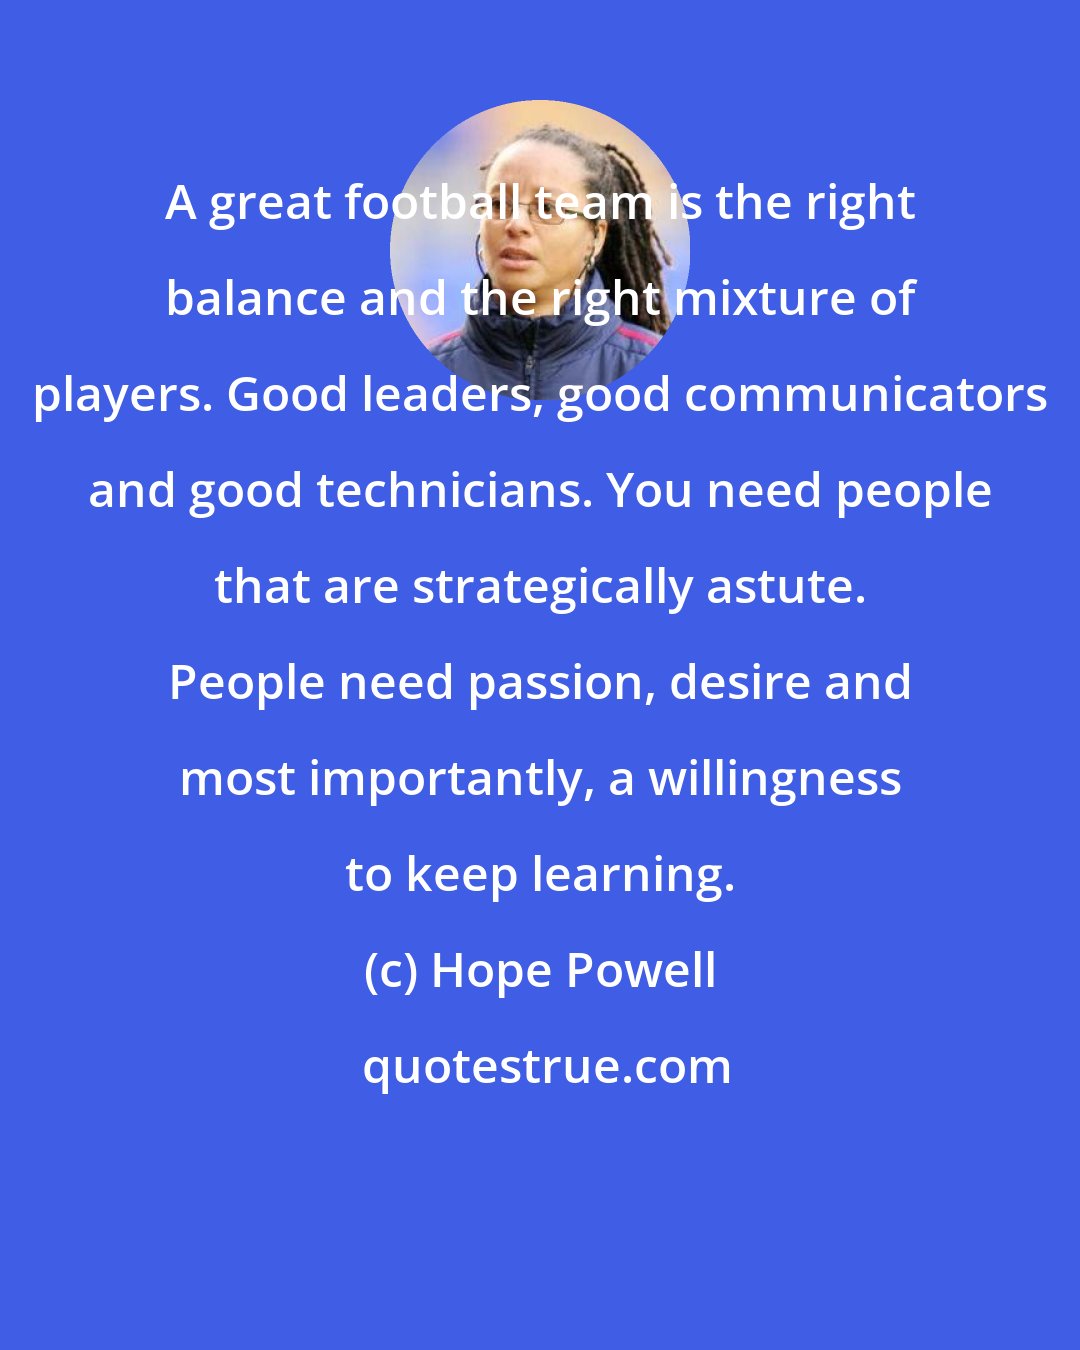 Hope Powell: A great football team is the right balance and the right mixture of players. Good leaders, good communicators and good technicians. You need people that are strategically astute. People need passion, desire and most importantly, a willingness to keep learning.